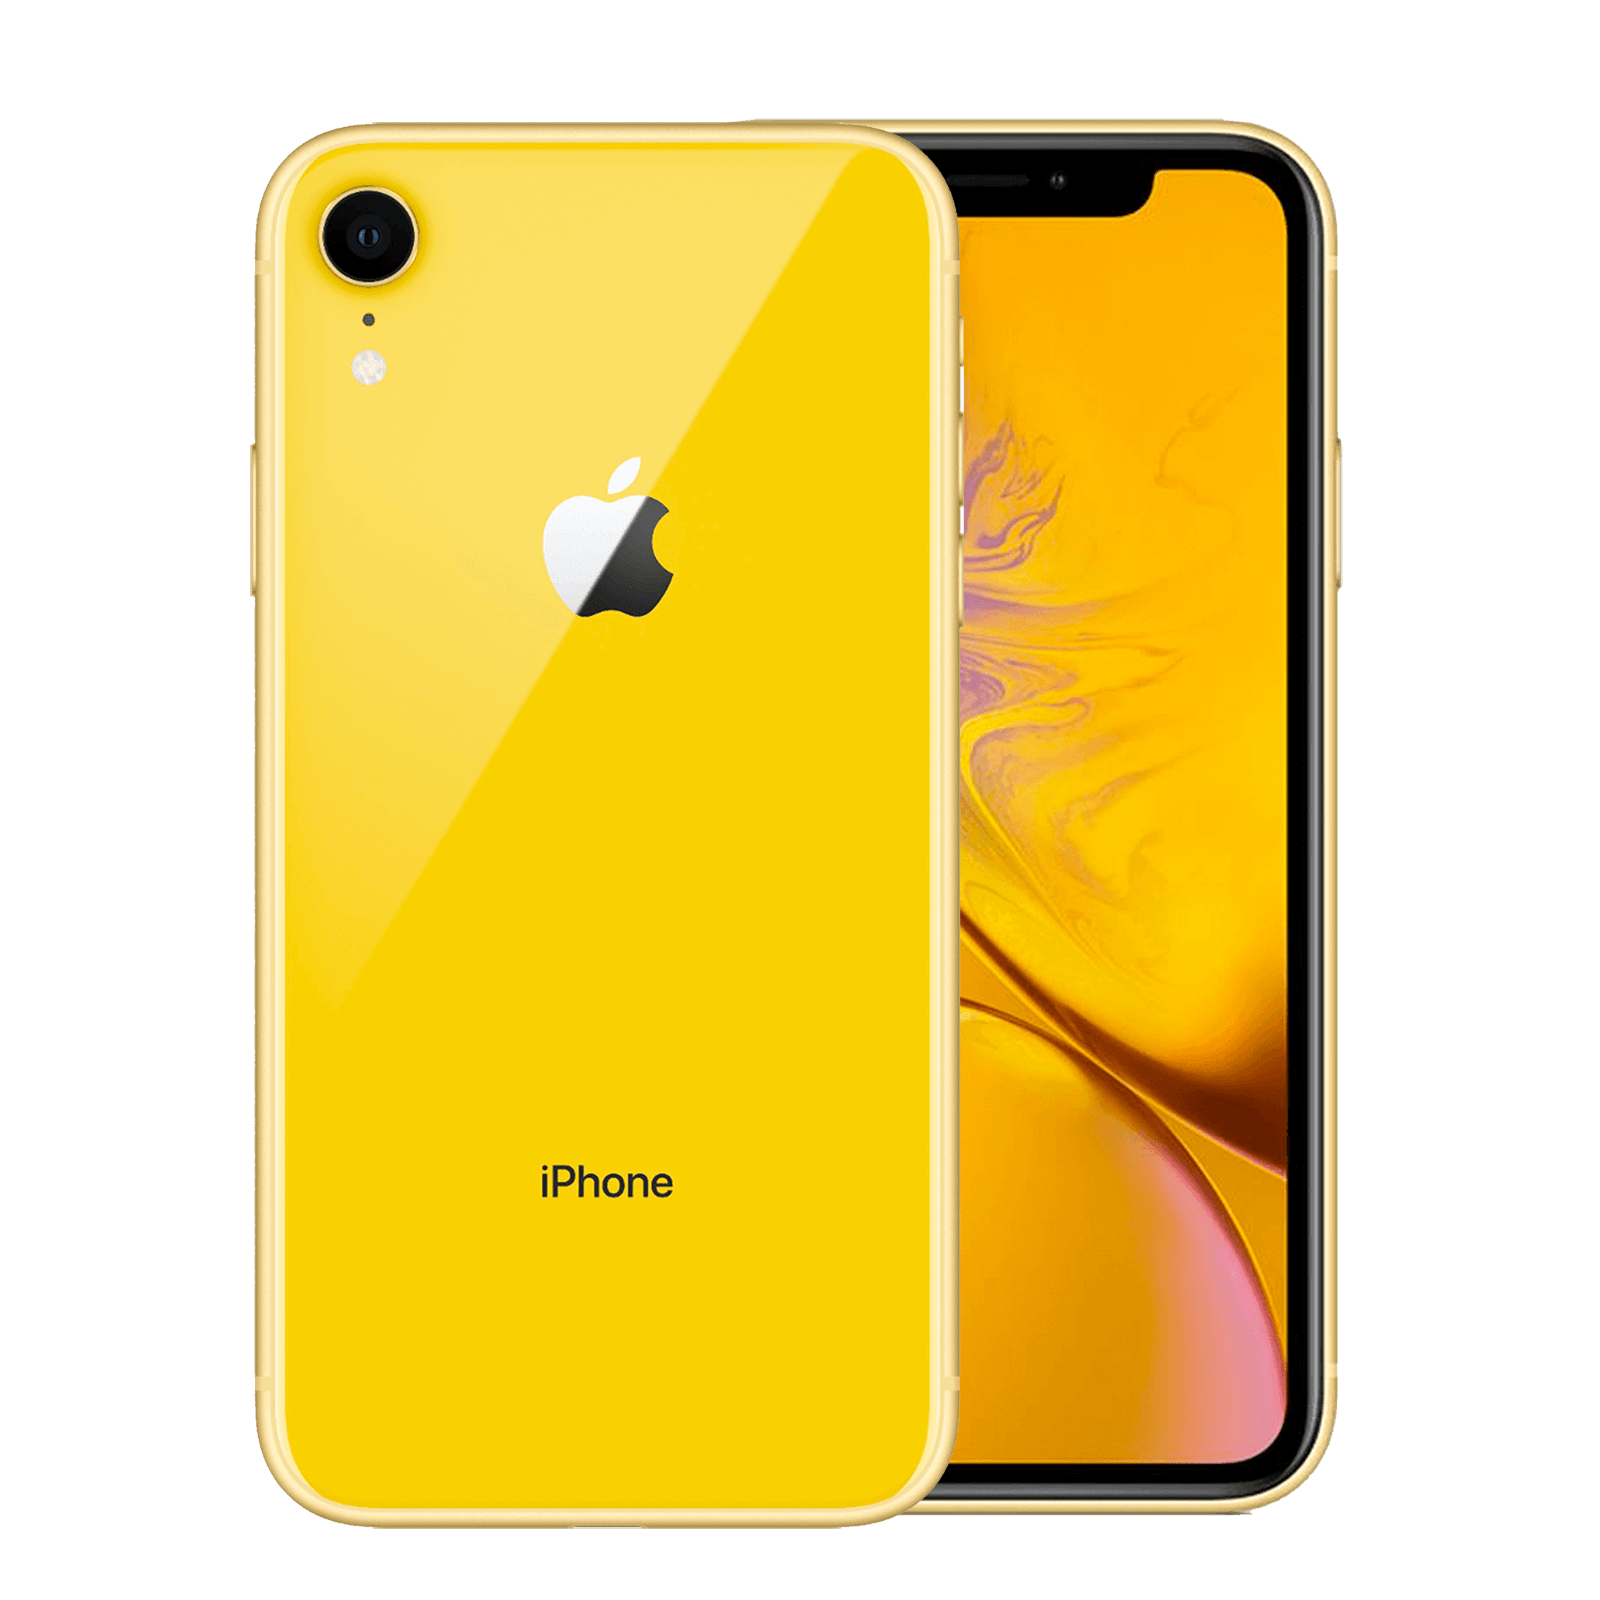 Apple iPhone XR 64GB Yellow Very Good - AT&T